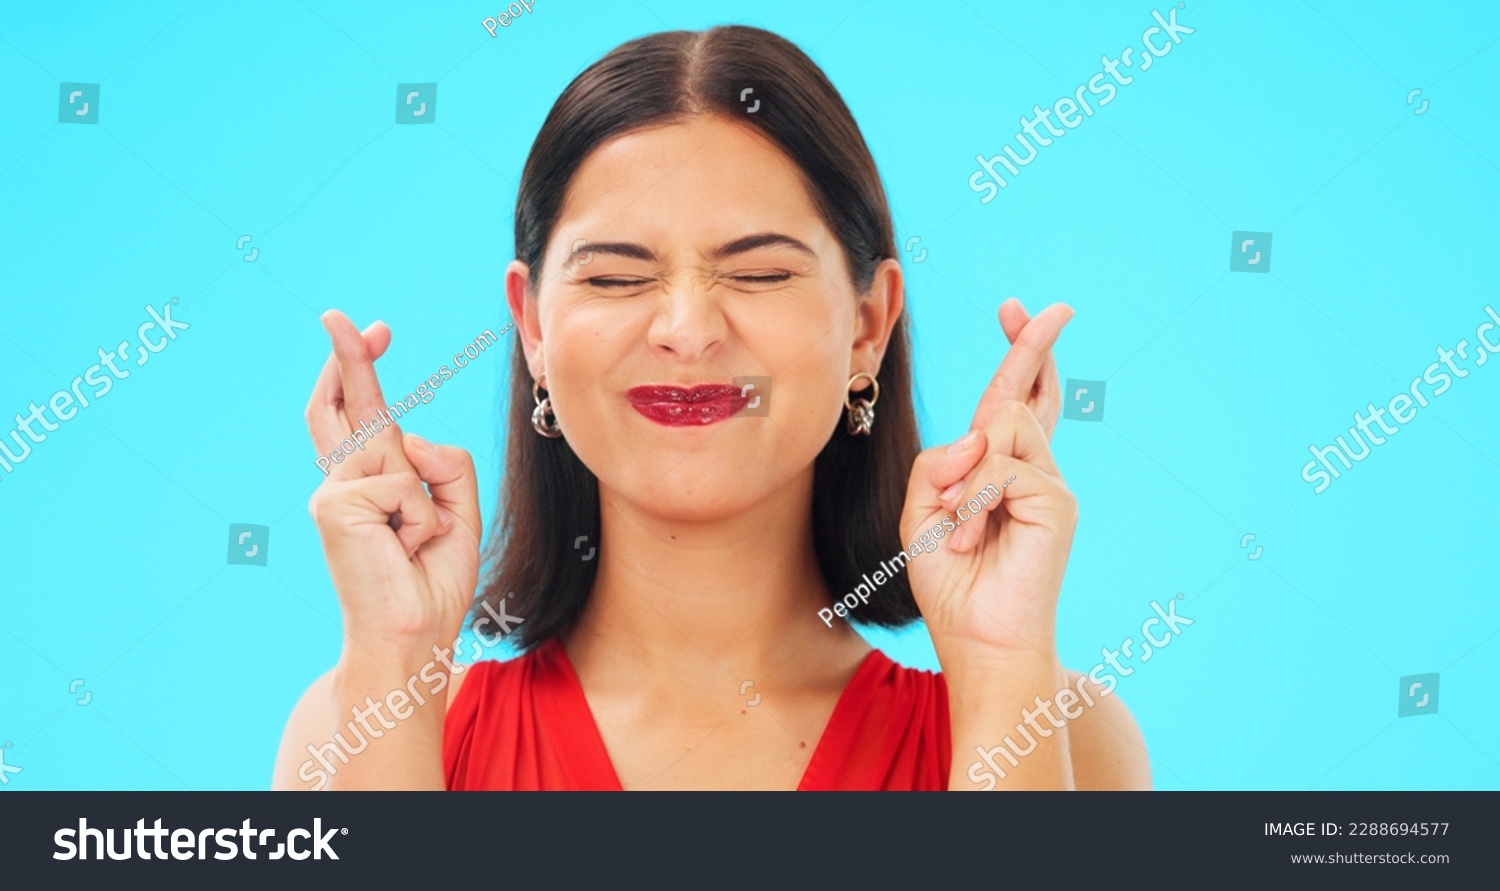 Happy, woman and face with fingers crossed on blue background, studio and wishing for good luck. Portrait of excited female model hope for winning prize, optimism and smile for emoji, hands and sign #2288694577